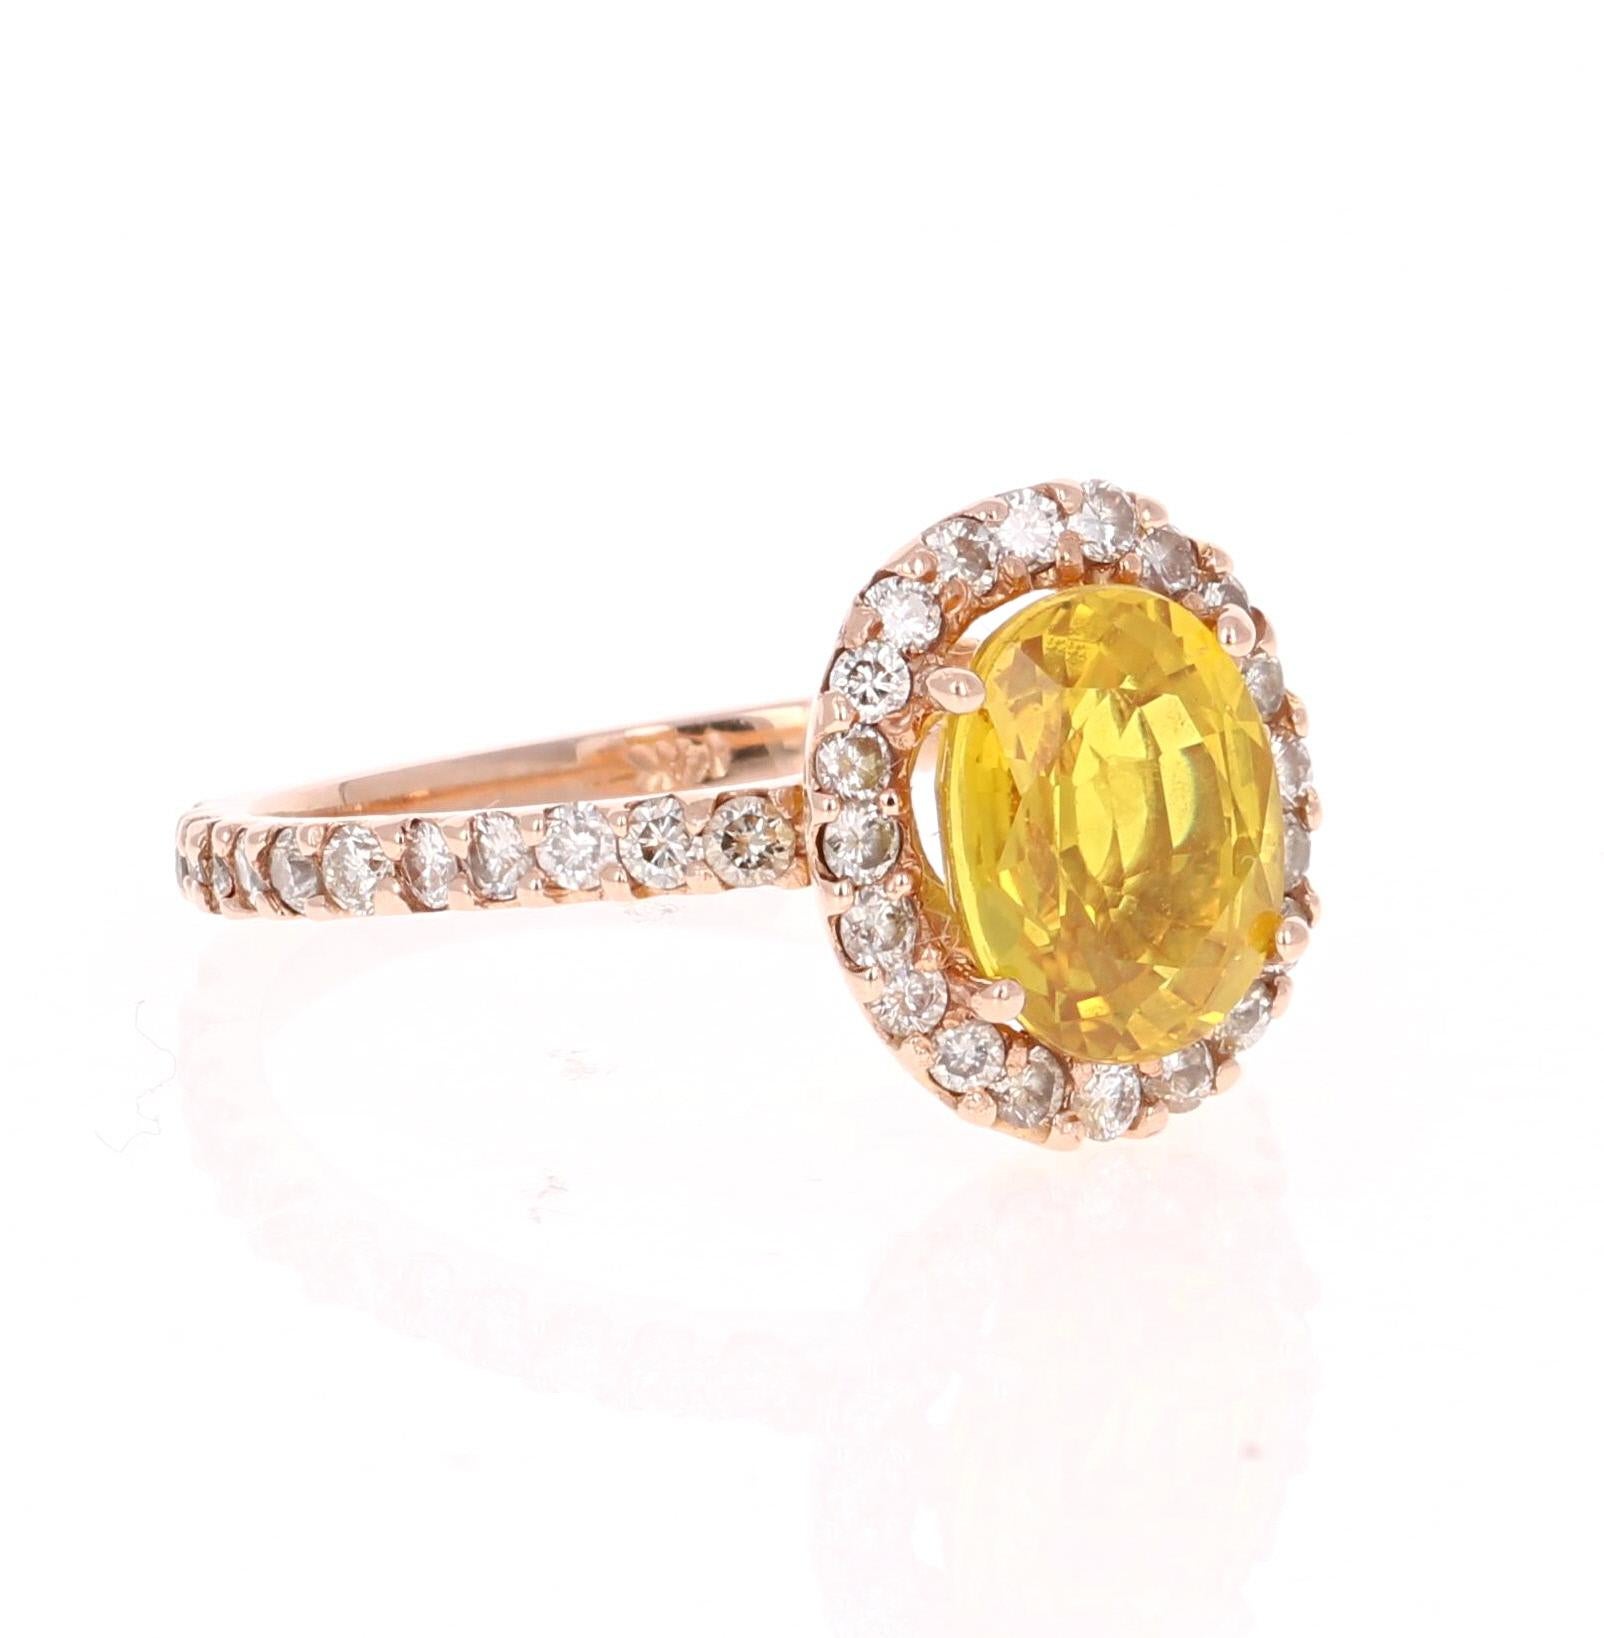 3.32 Carat Yellow Sapphire Halo Diamond Rose Gold Engagement Ring

Yellow Sapphire Diamond Ring that can be a beautiful Engagement Ring. The Oval Cut Yellow Sapphire is 2.66 Carats. 
It has a halo of 30 Round Cut Diamonds that weigh 0.66 Carats. The